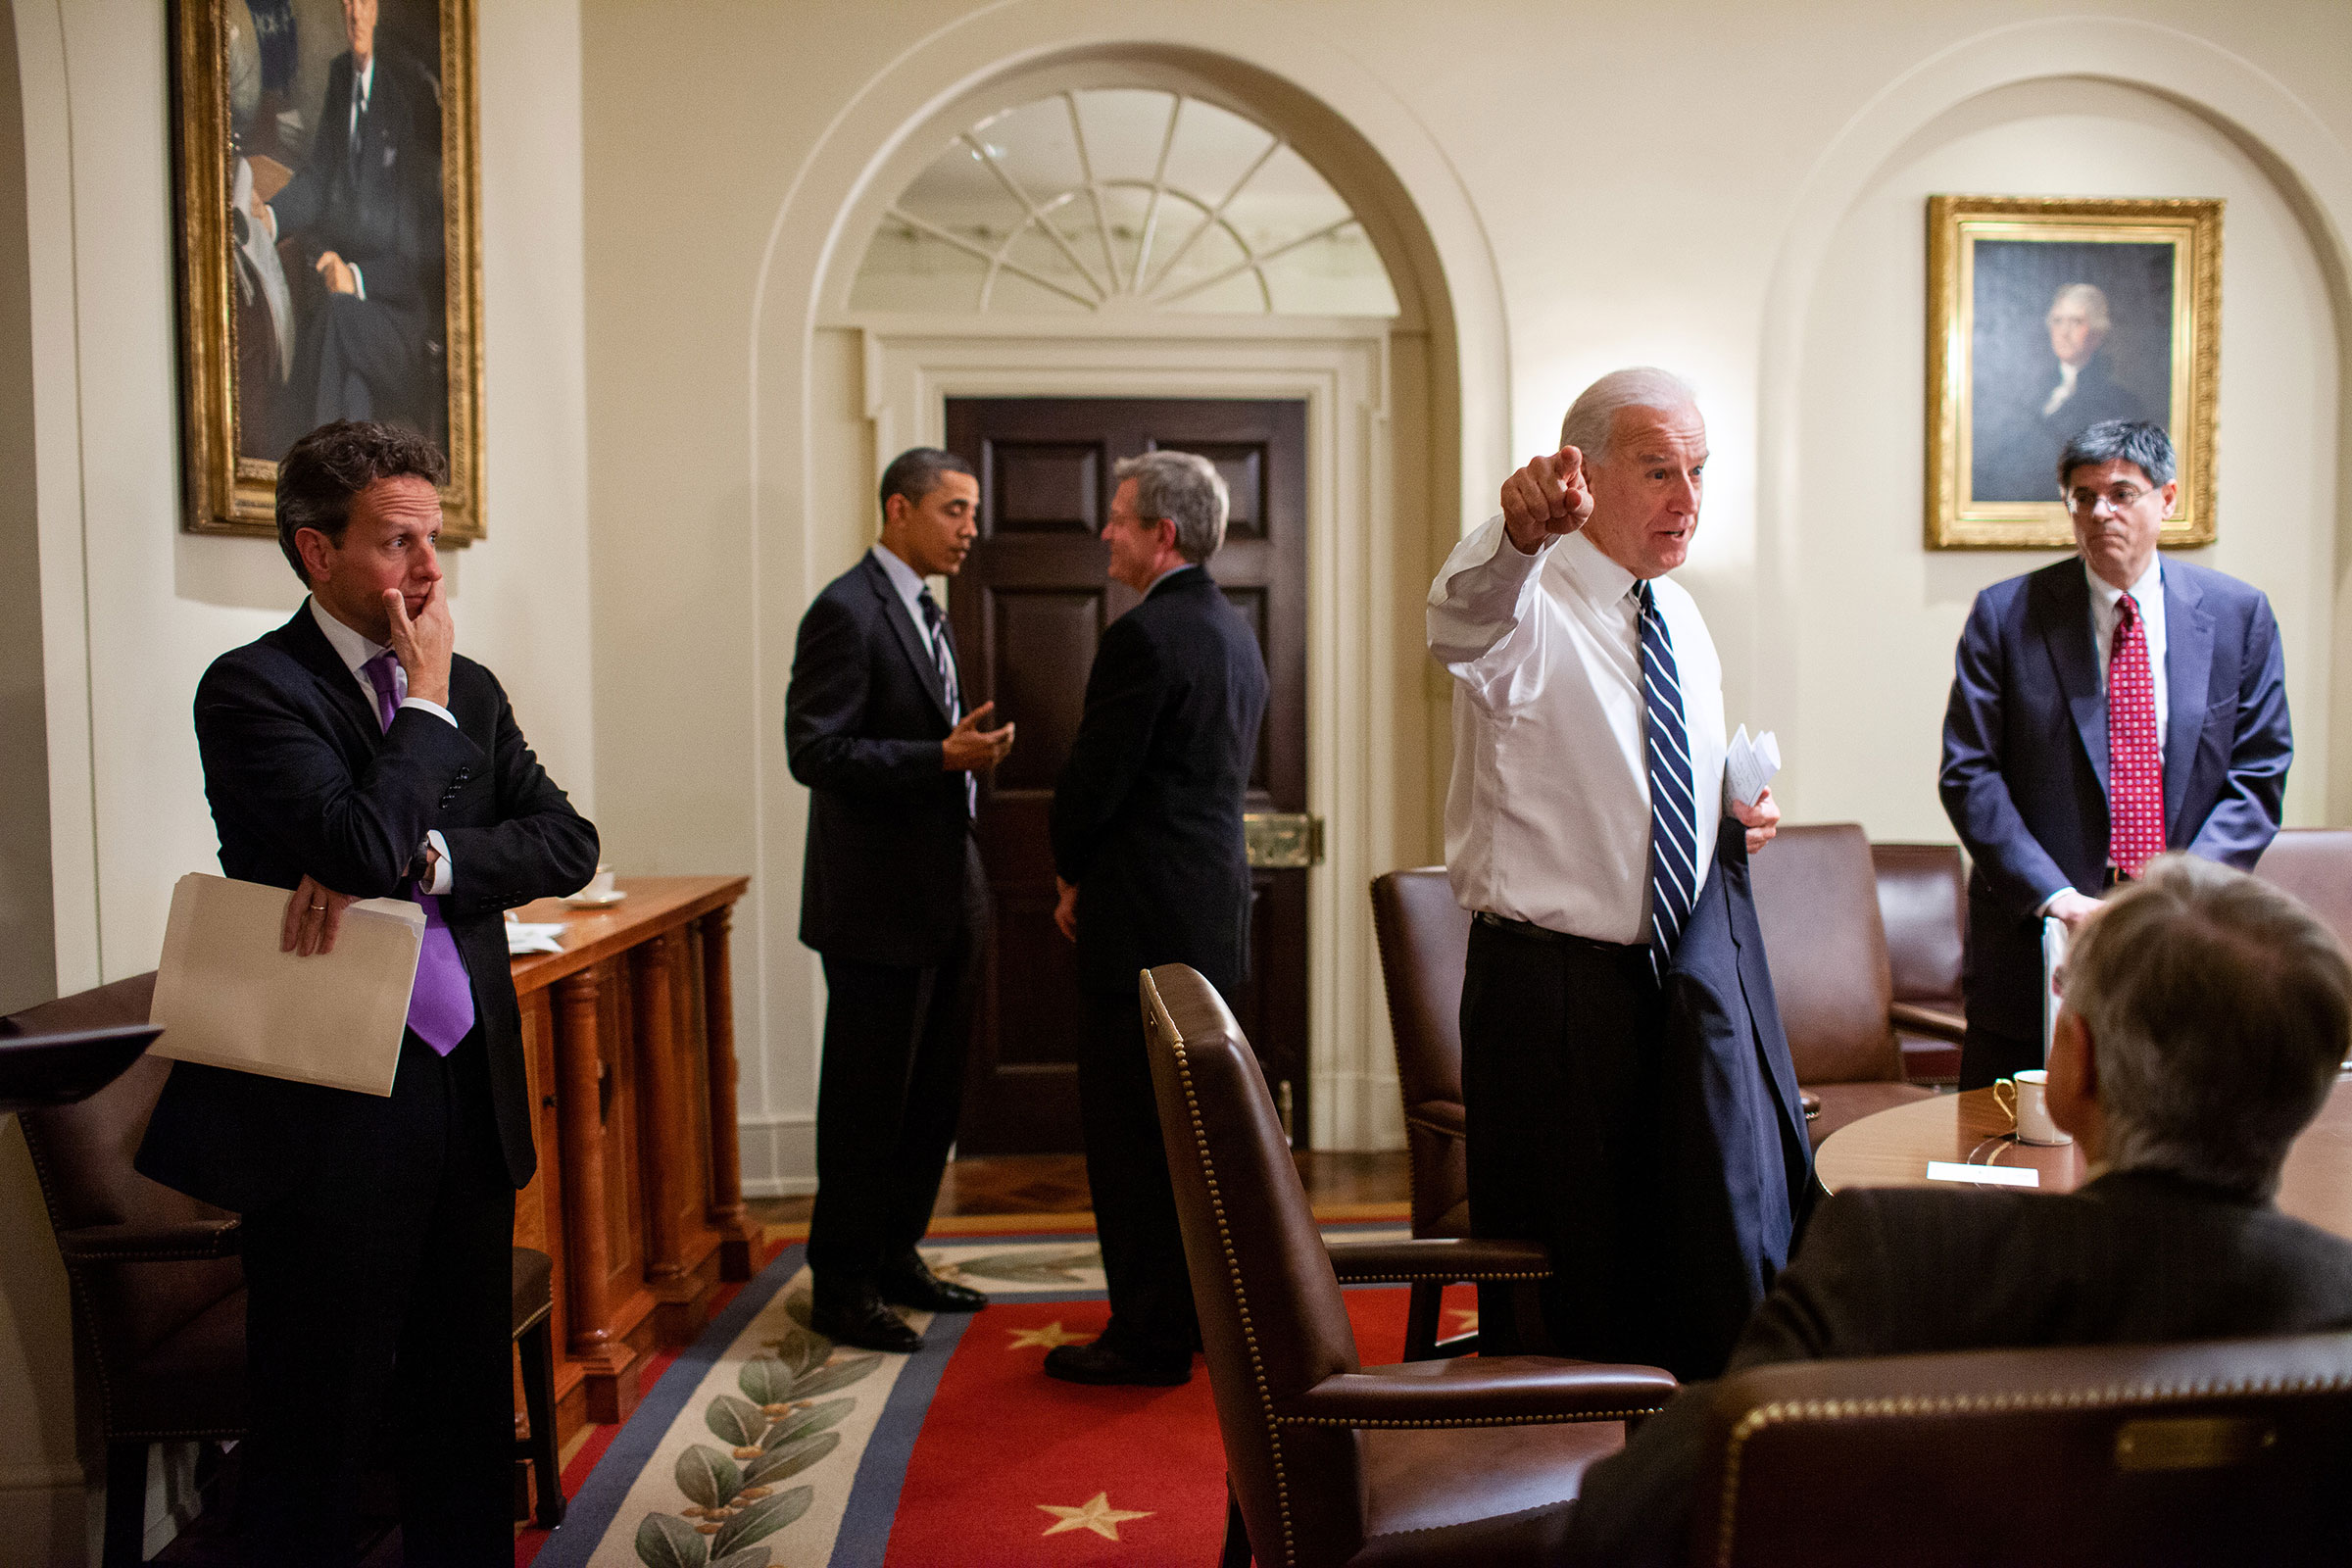 President Barack Obama, Vice President Joe Biden, and Treasury Secretary Timothy F. Geithner meet with Senate Democratic leaders in the Roosevelt Room of the White House, on Dec. 6, 2010.